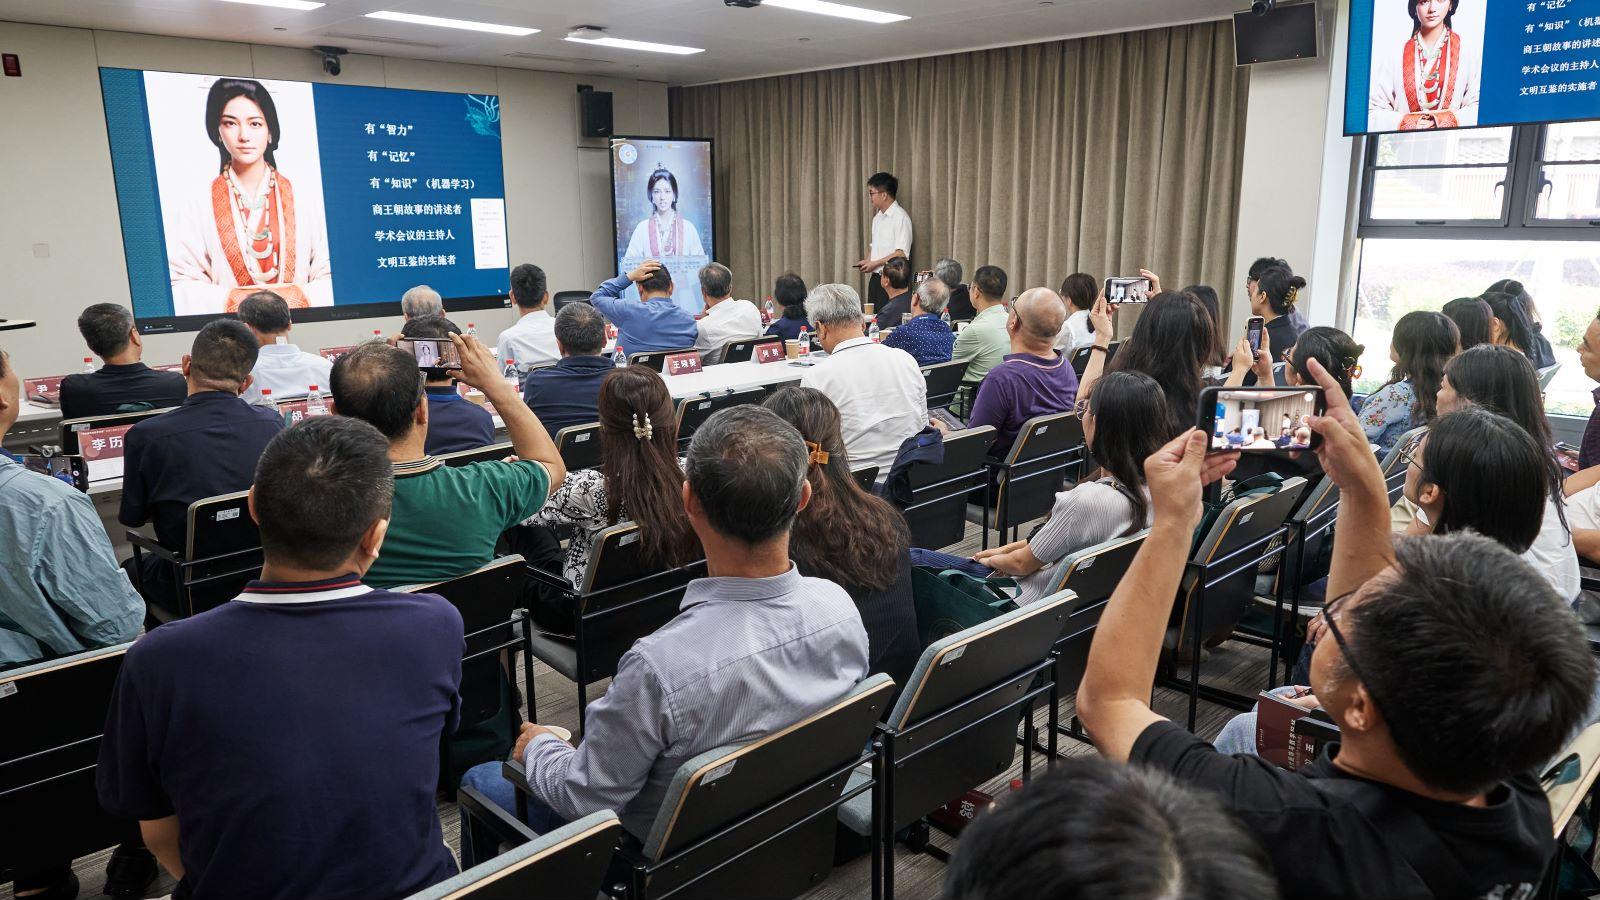 SUSTech holds Cultural Heritage Forum on Study of Shang Dynasty Clothing and Digitalization of Queen Fuhao of Ancient China